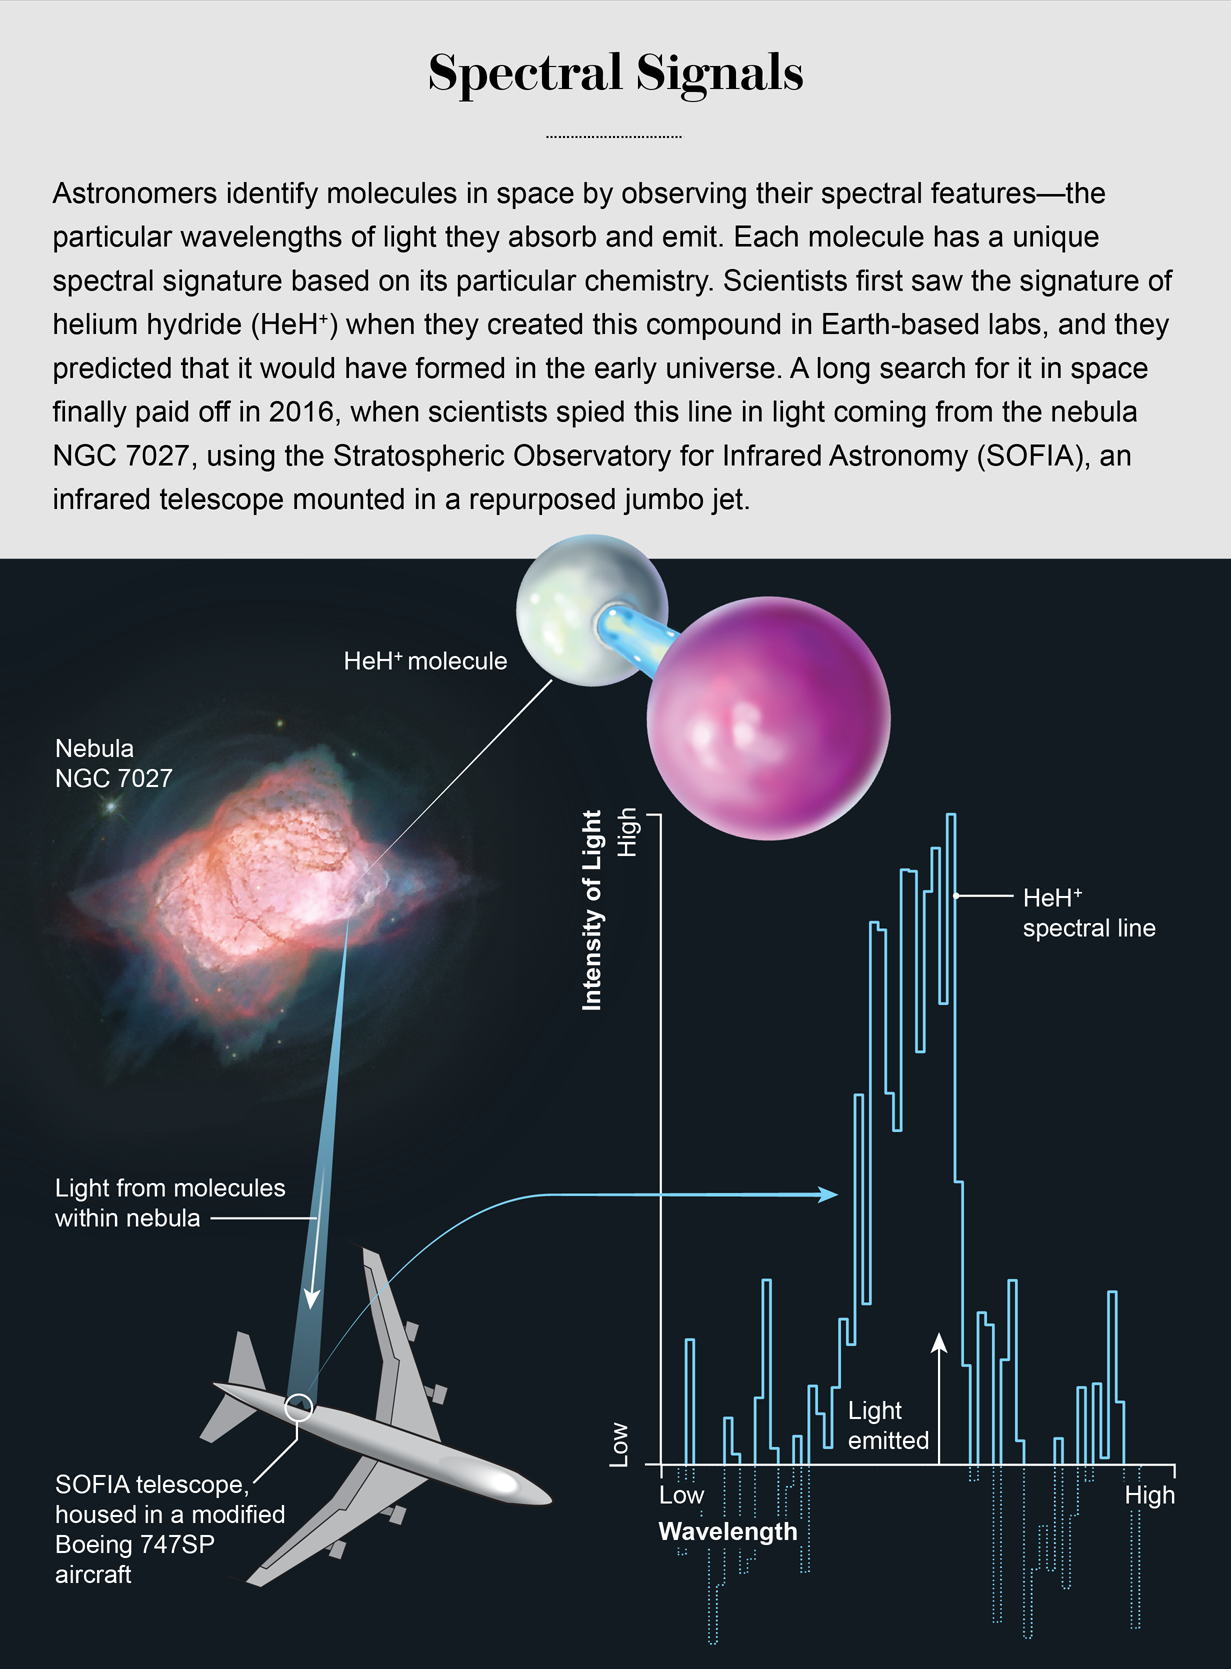 Graphic shows light from helium hydride in Nebula NGC 7027 entering the SOFIA telescope, alongside a chart of the molecule's unique spectral signature